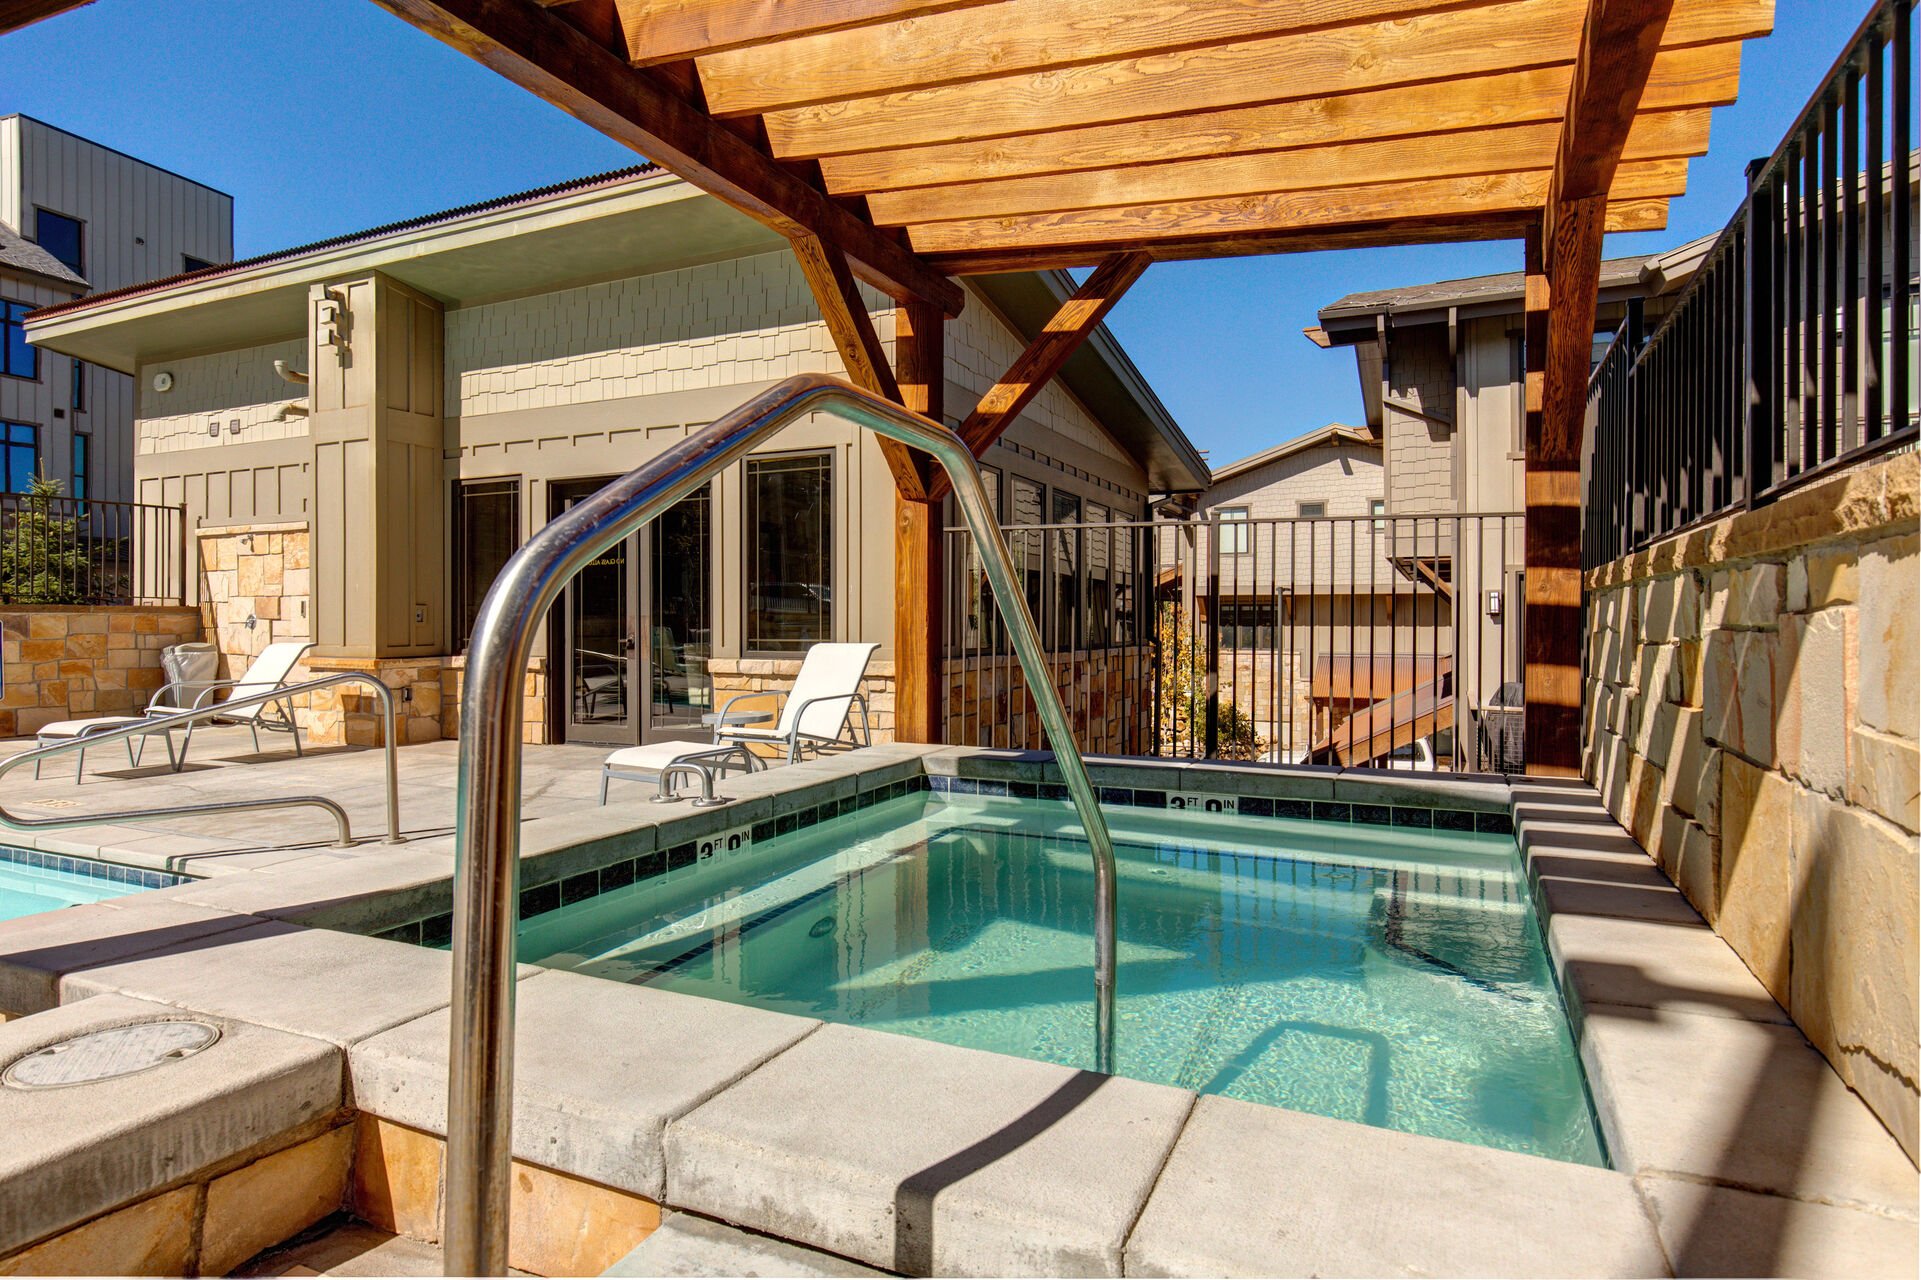 Blackstone Ameneties Building with year-round heated pool, hot tub, and fitness center